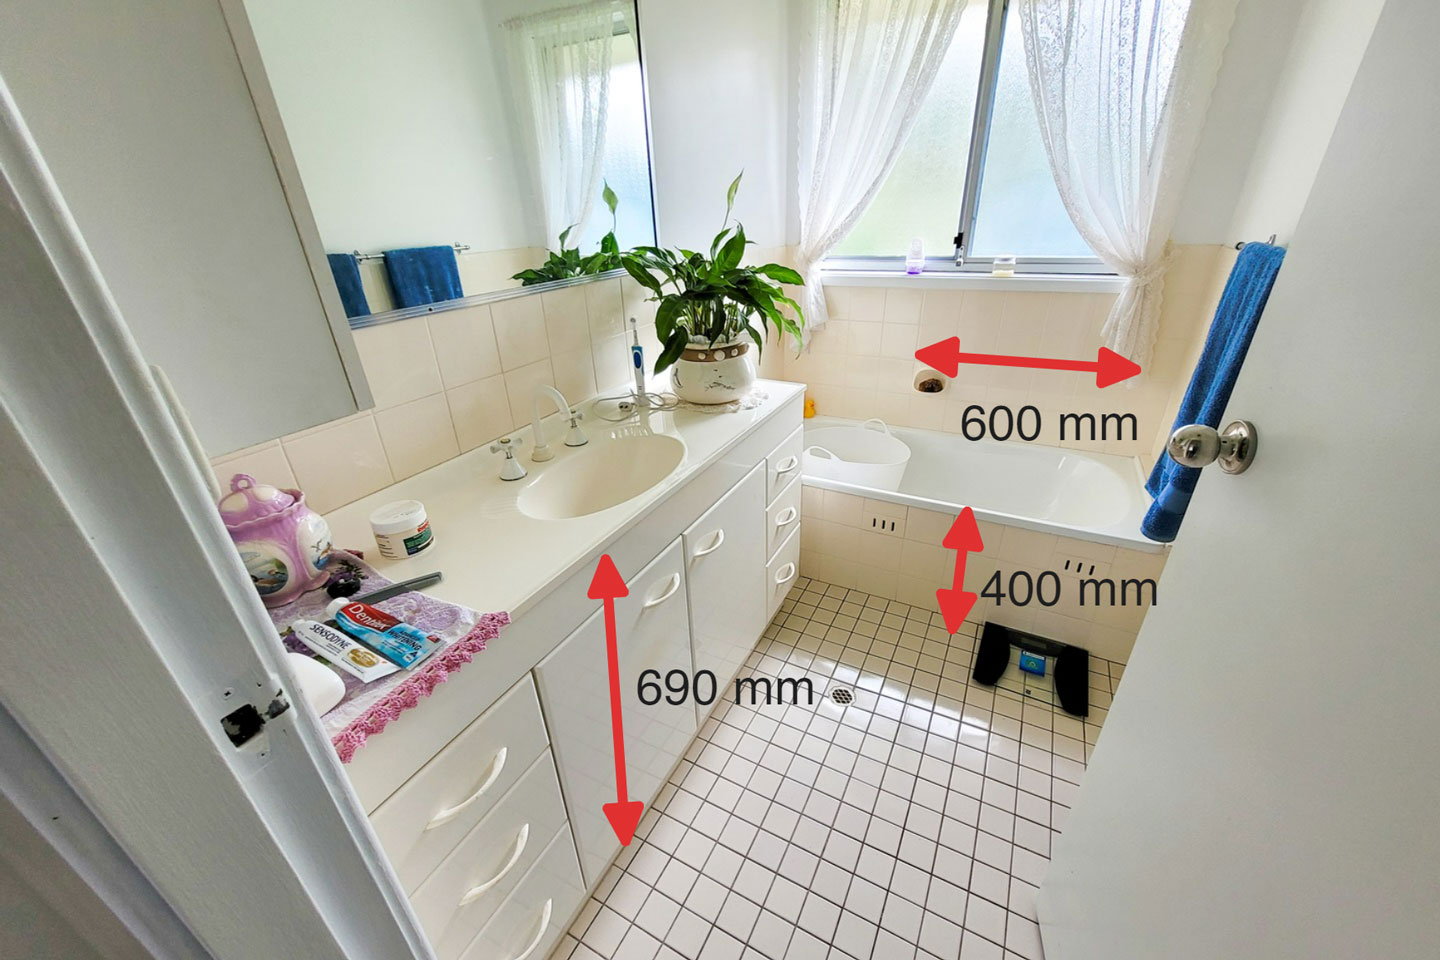 Picture of a bathroom with measurements drawn on top